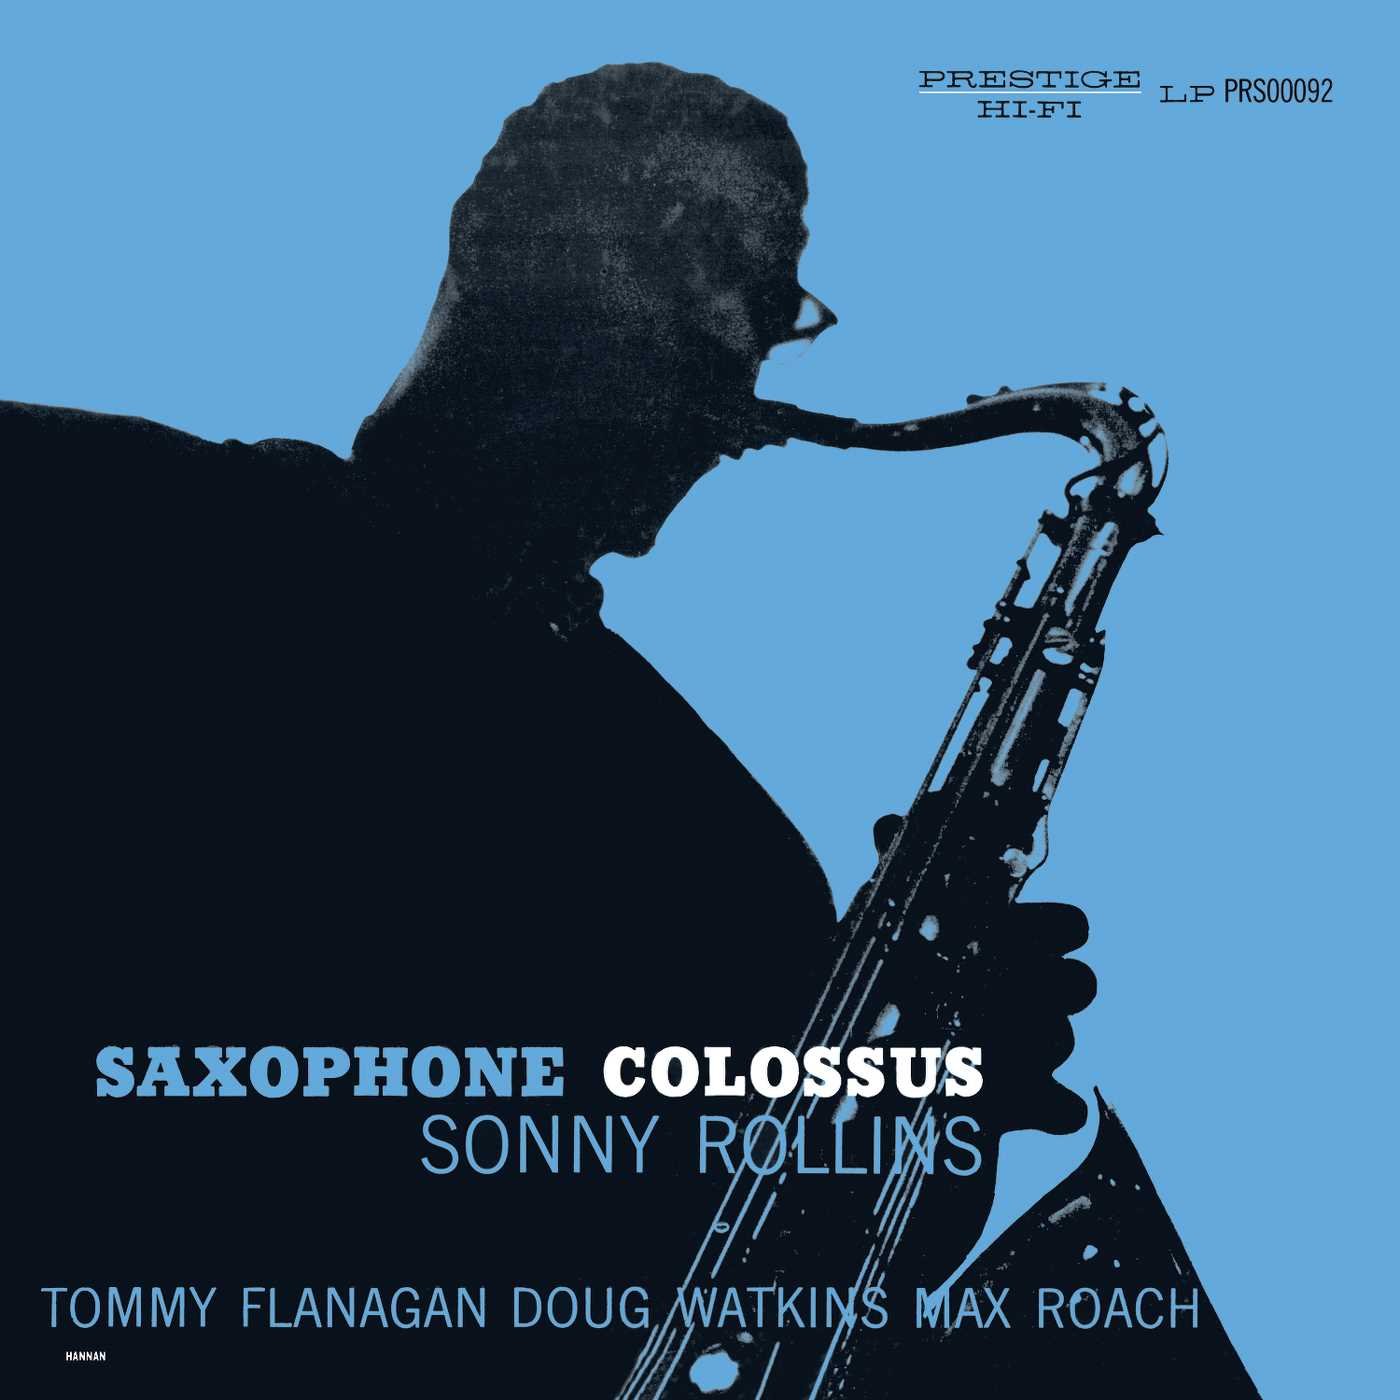 Sonny Rollins - Saxophone Colossus [180g]